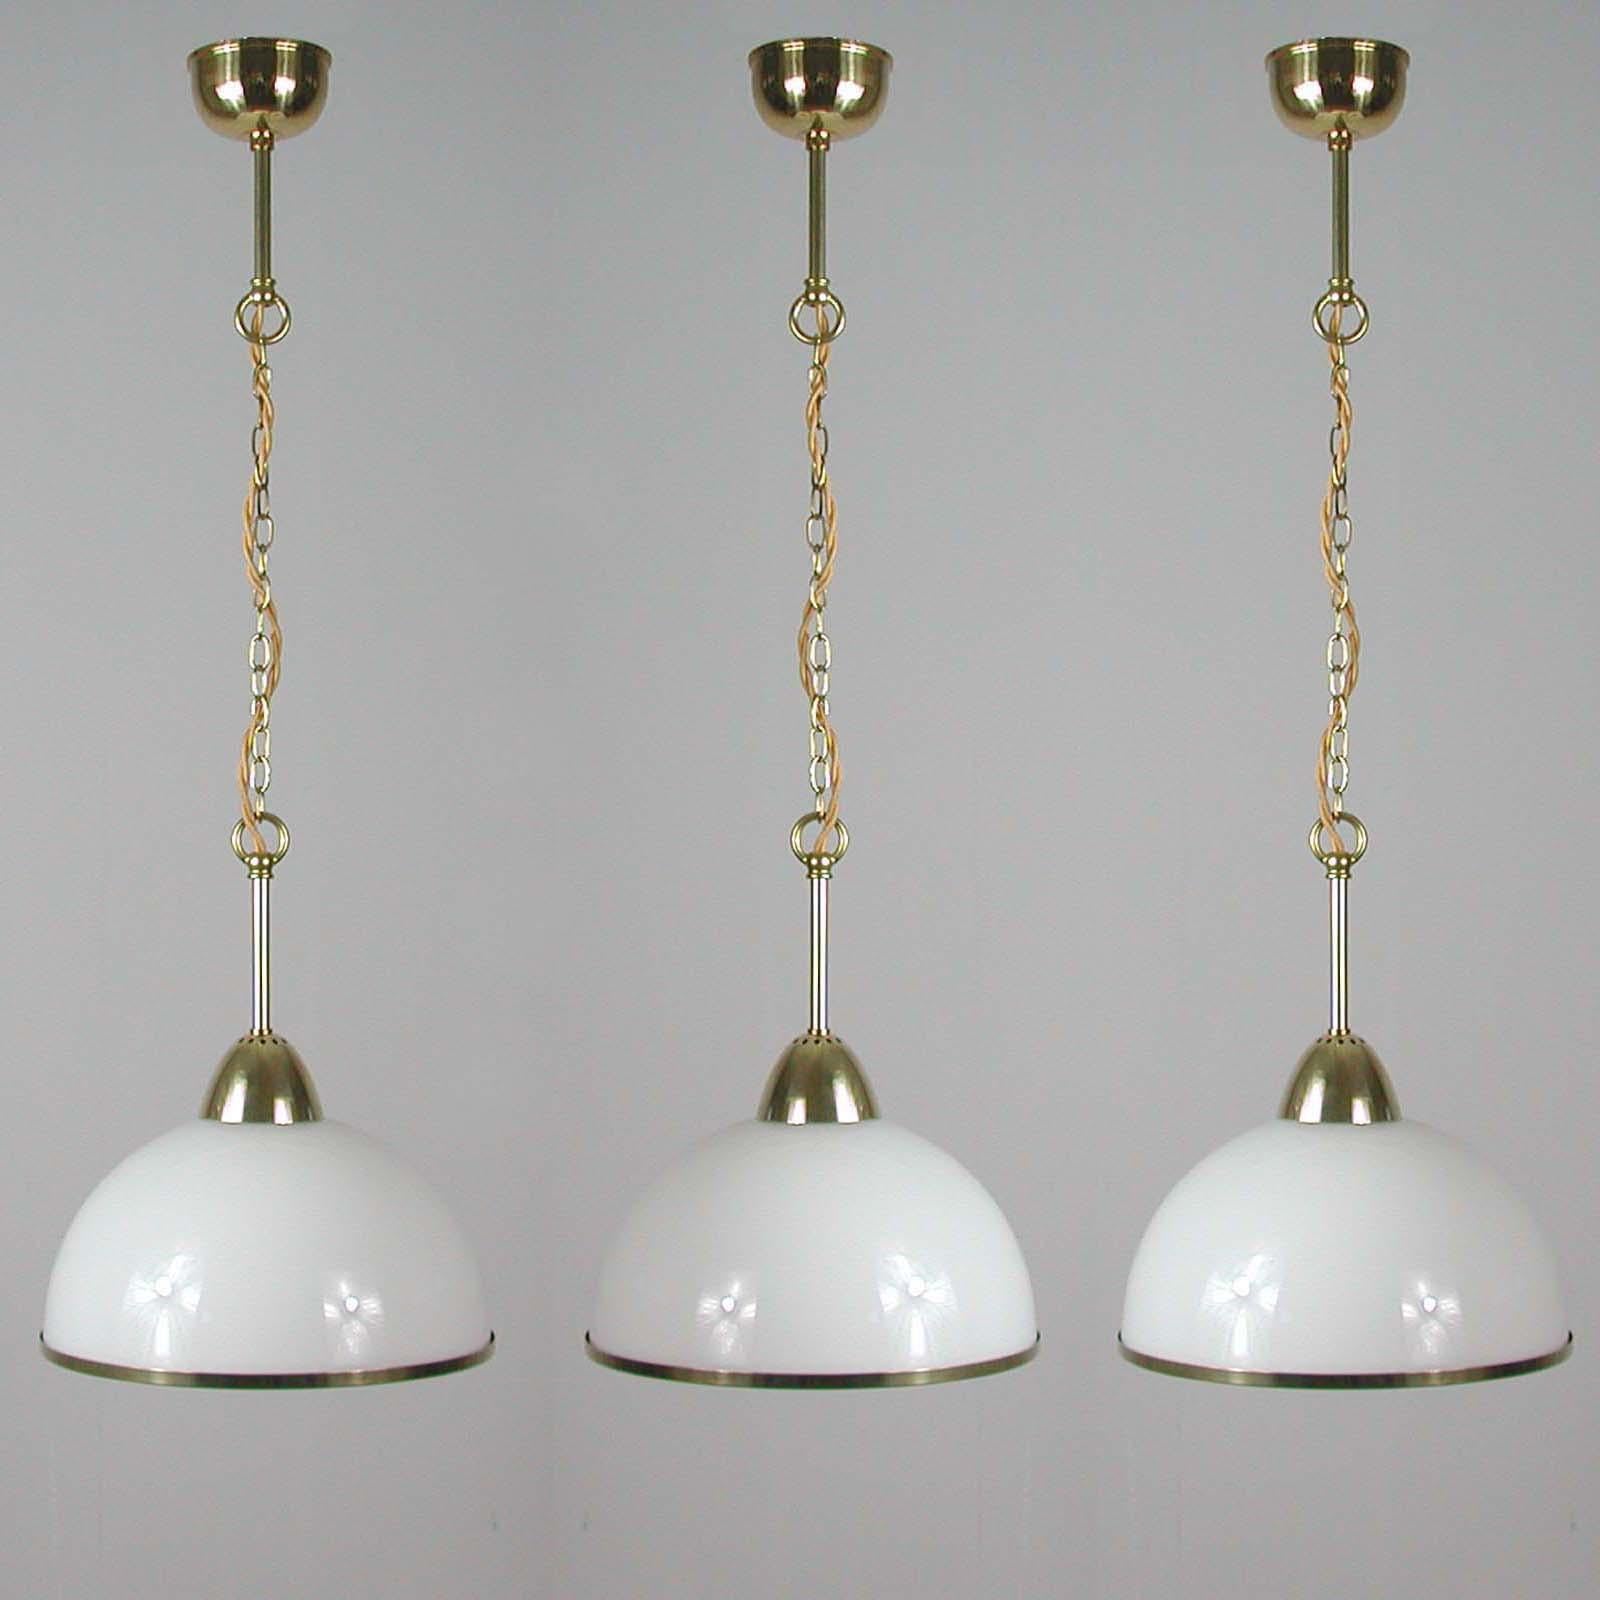 This elegant midcentury pendant was designed and made in Sweden in the 1950s. The light features a white opaline glass lampshade and brass hardware. Good vintage condition with one E27 socket per lamp.

The lamps have been rewired for use in US